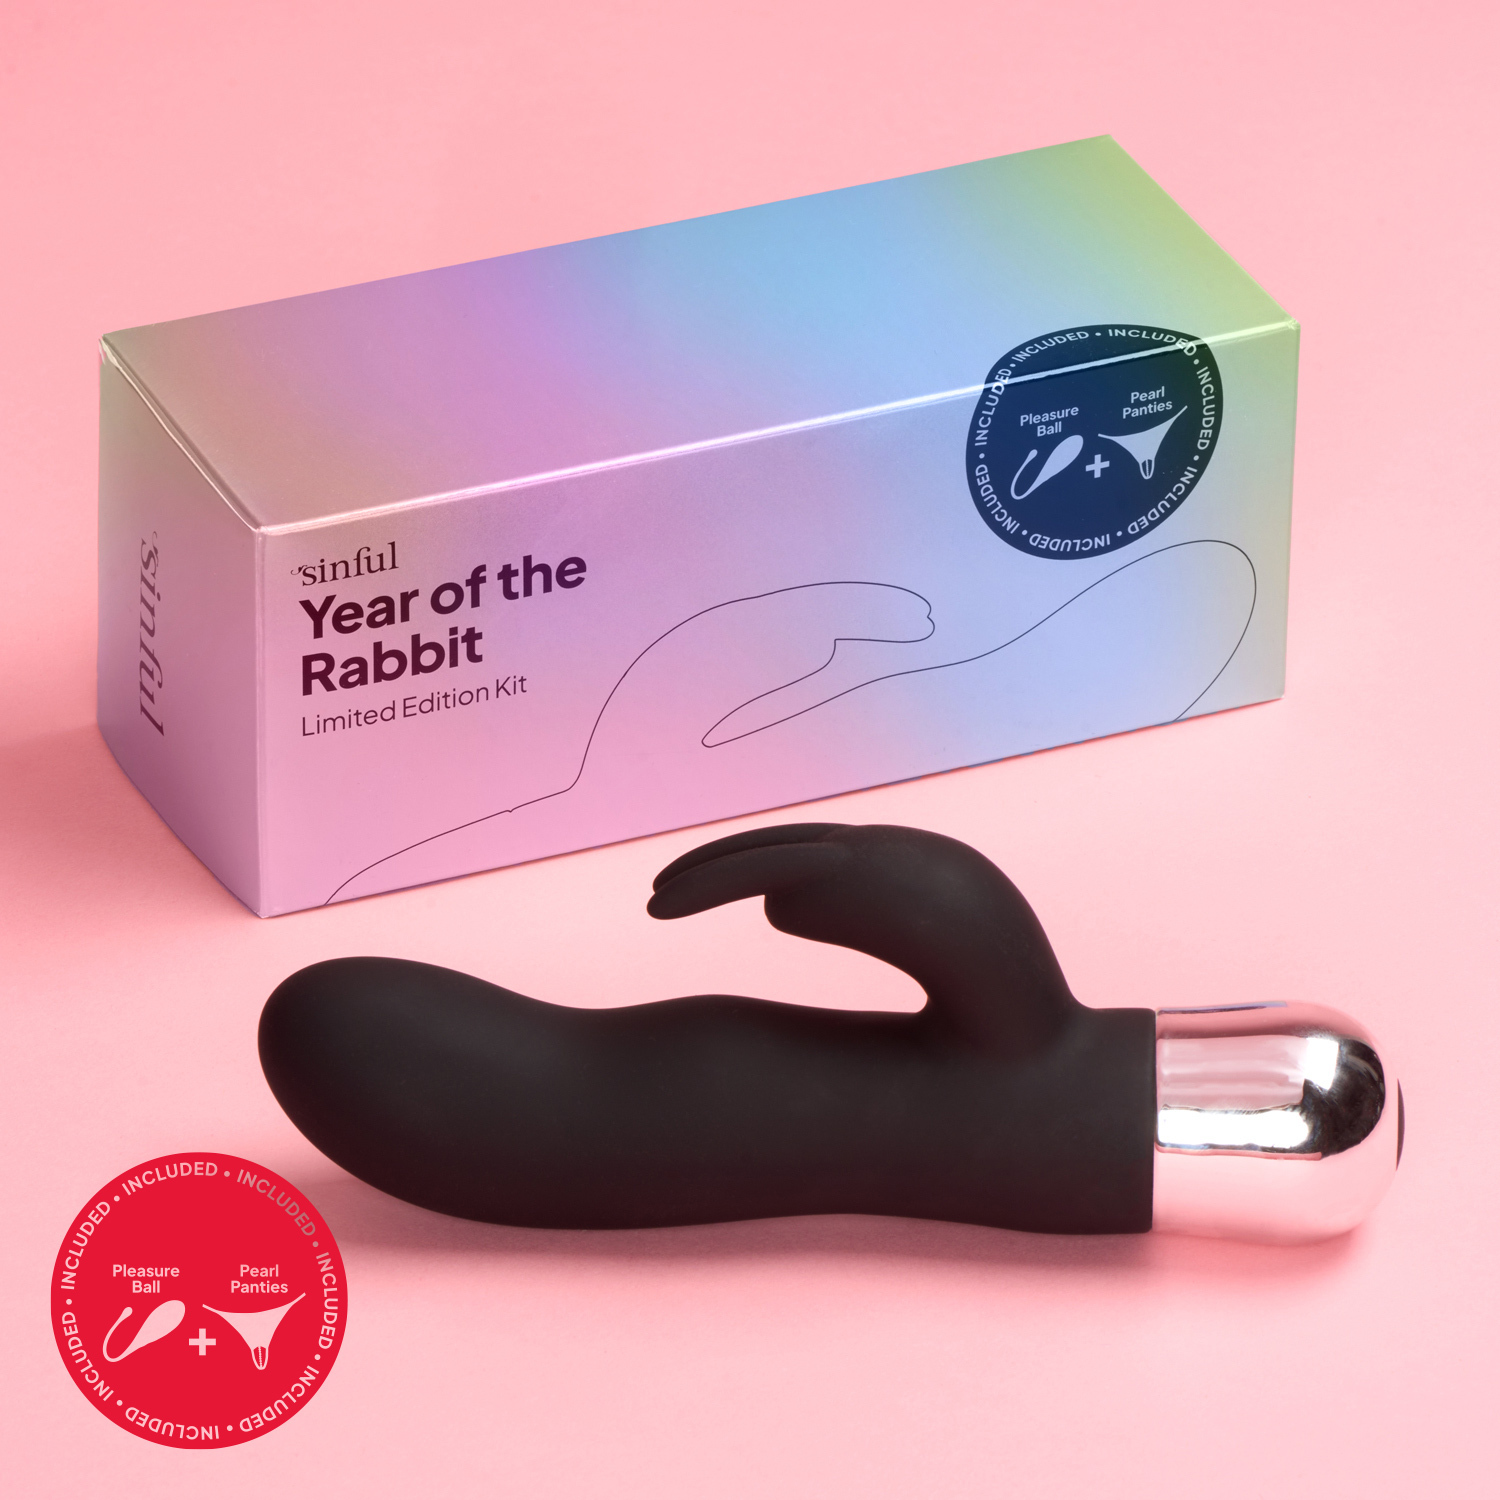 Sinful Year of the Rabbit Limited Edition Kit - Sort